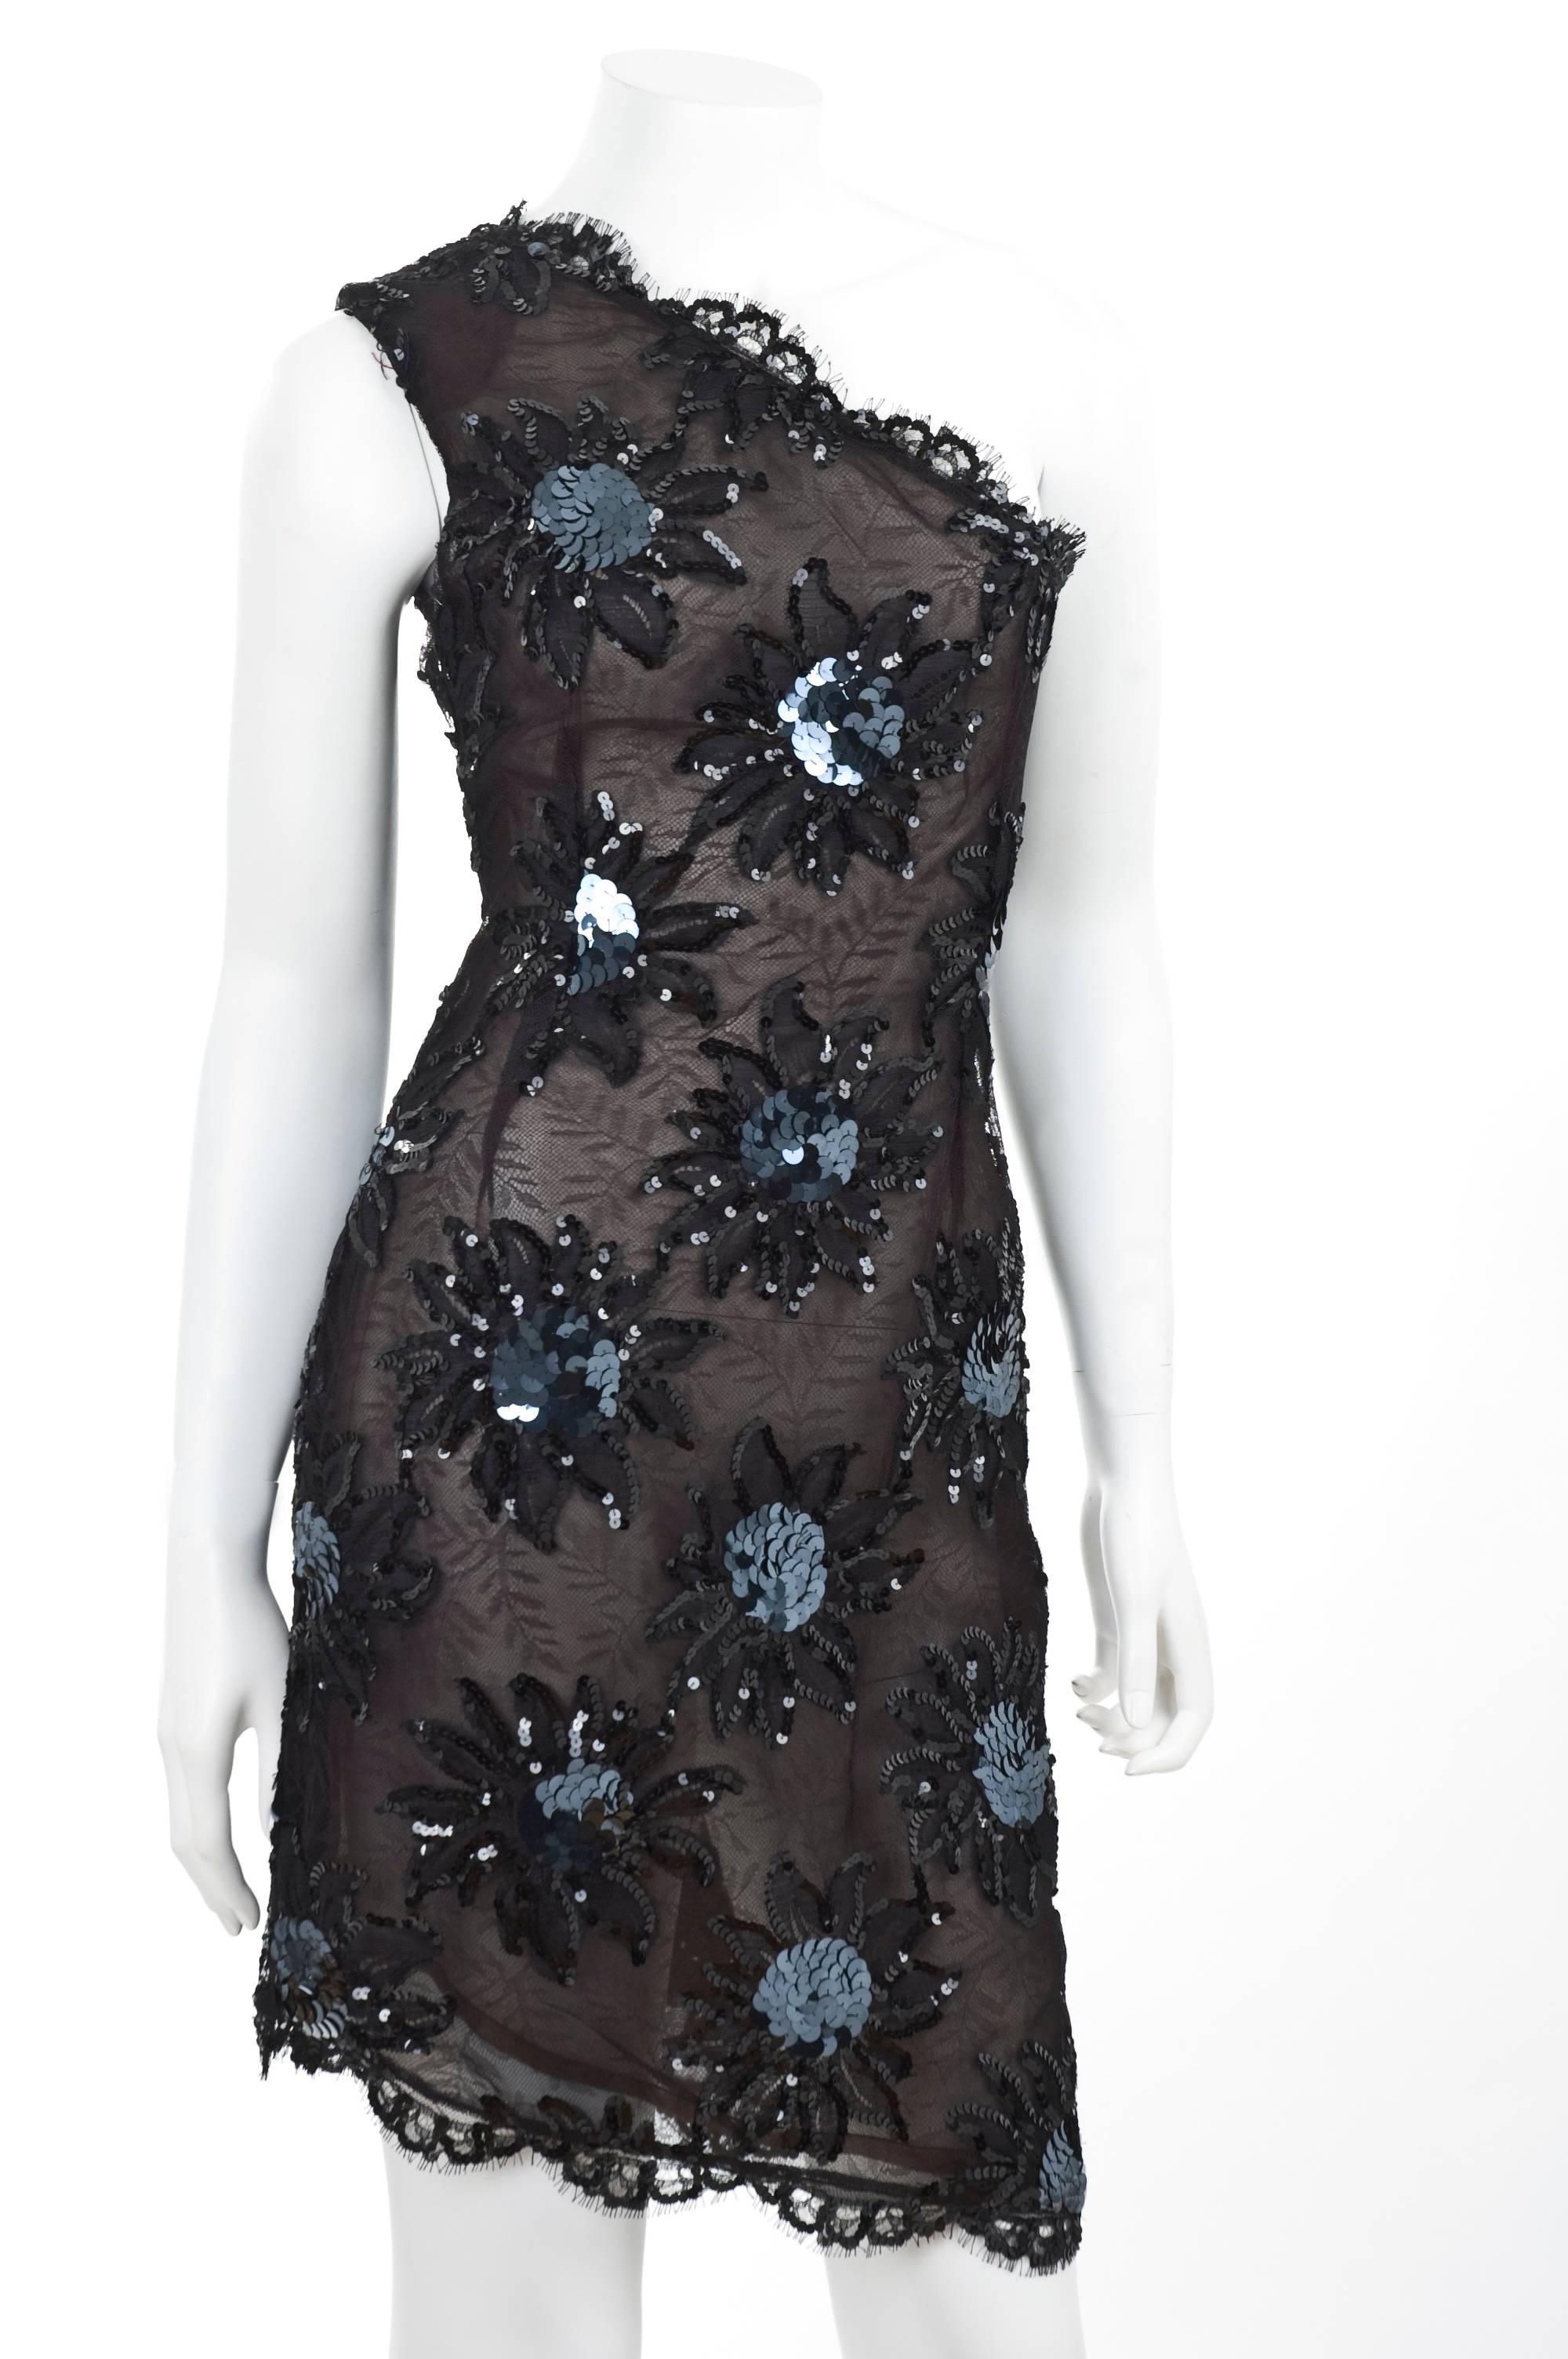 1987 Rare Yves Saint Laurent Cocktail Dress in Black Lace and Sequins  For Sale 1